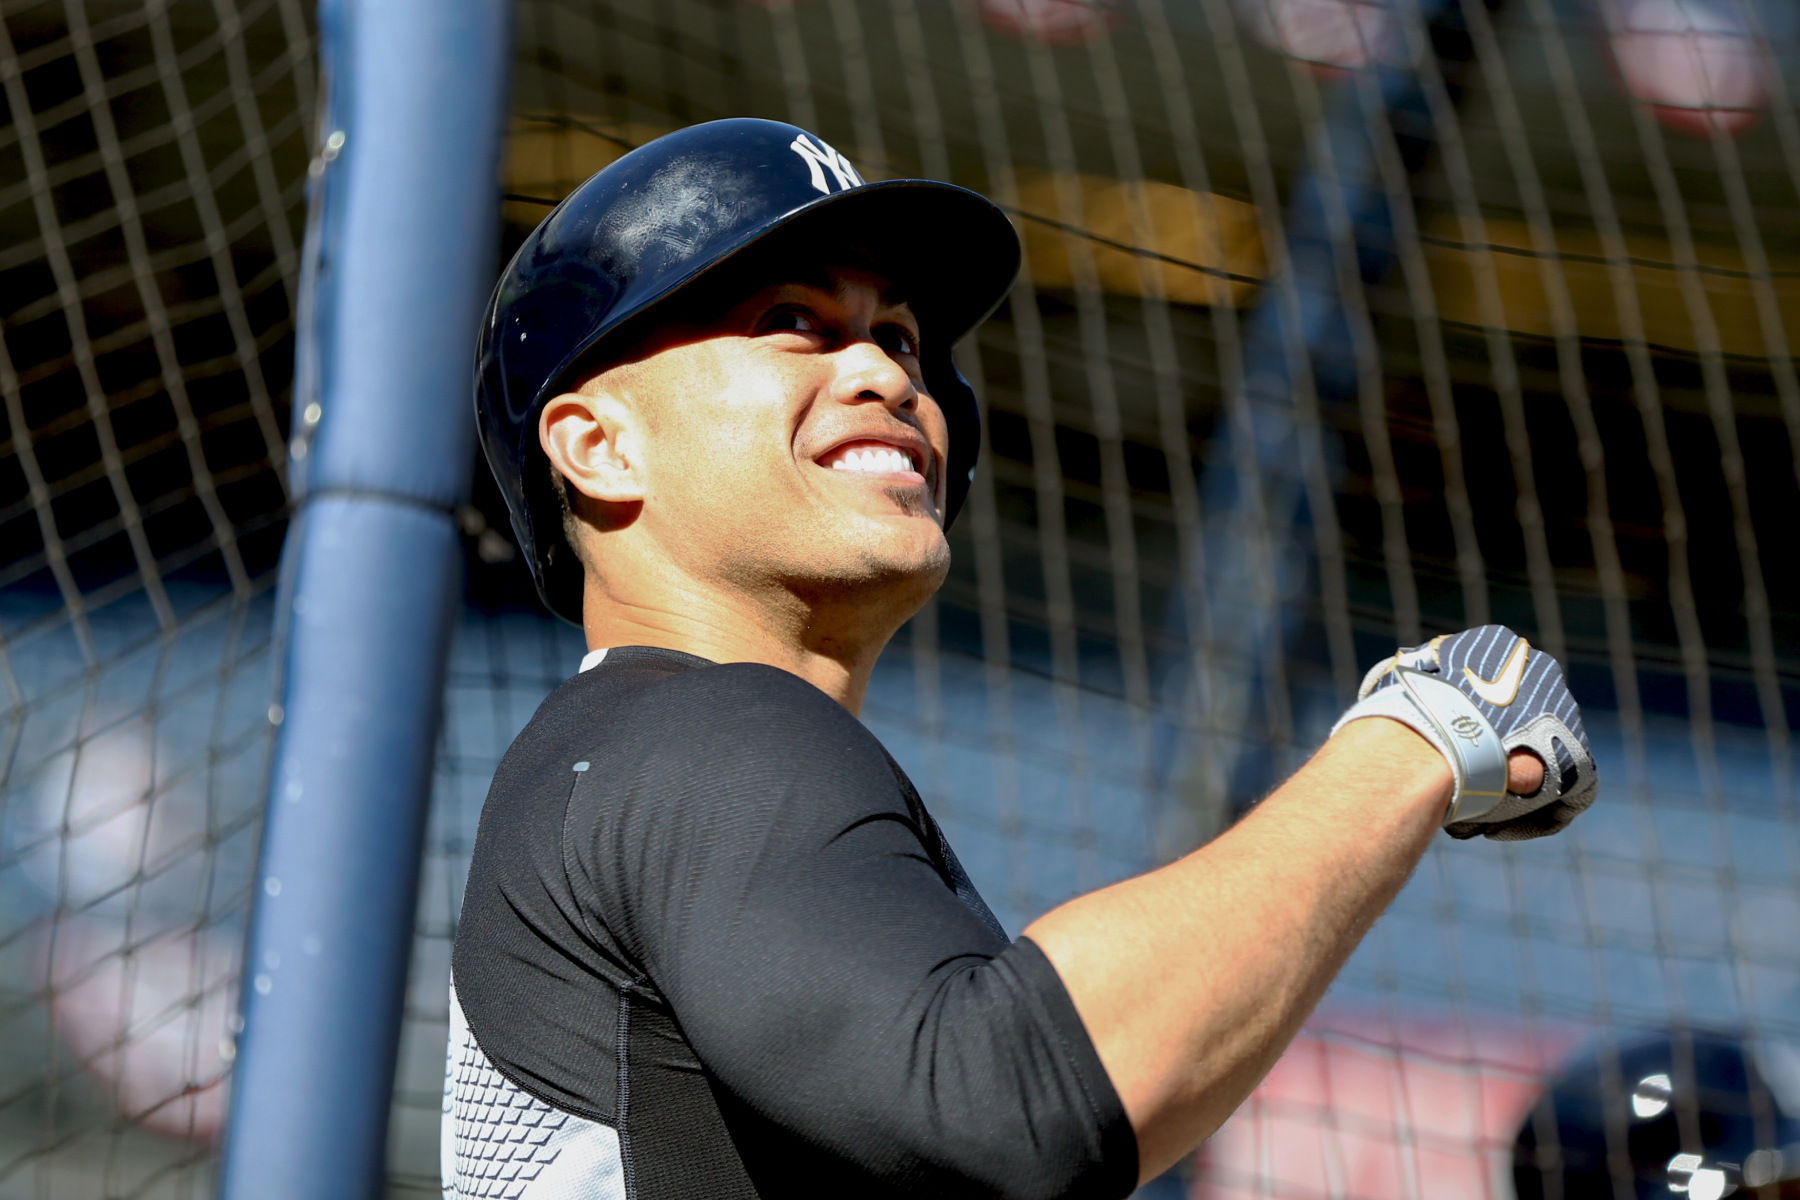 New York Yankees slugger Giancarlo Stanton went by Mike Stanton early in his career. Who does he not go by Mike anymore?